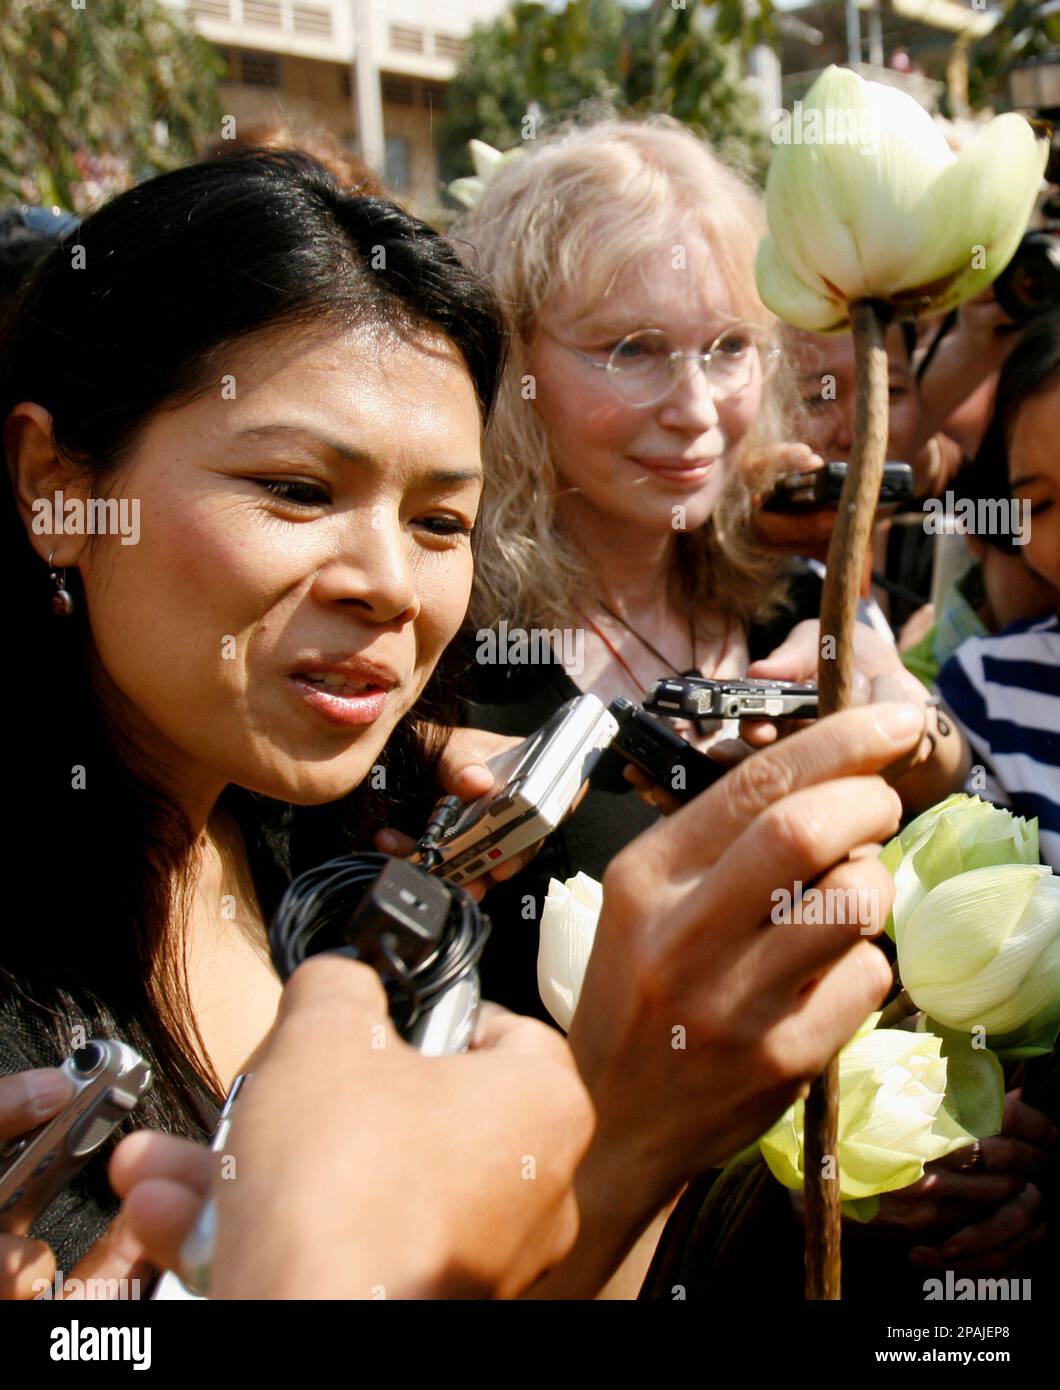 Theary Seng, left, Cambodian Executive Director of the Center for Social Development, left, and American actress Mia Farrow, right, give lotus flowers to police officers as authorities block their group outside Tuol Sleng genocide museum in Phnom Penh, Cambodia, Sunday, Jan. 20, 2008. Cambodian police blocked Farrow from holding a genocide memorial ceremony Sunday at a Khmer Rouge prison, at one point forcefully pushing her group away from a barricade. (AP Photo/Heng Sinith) Stock Photo